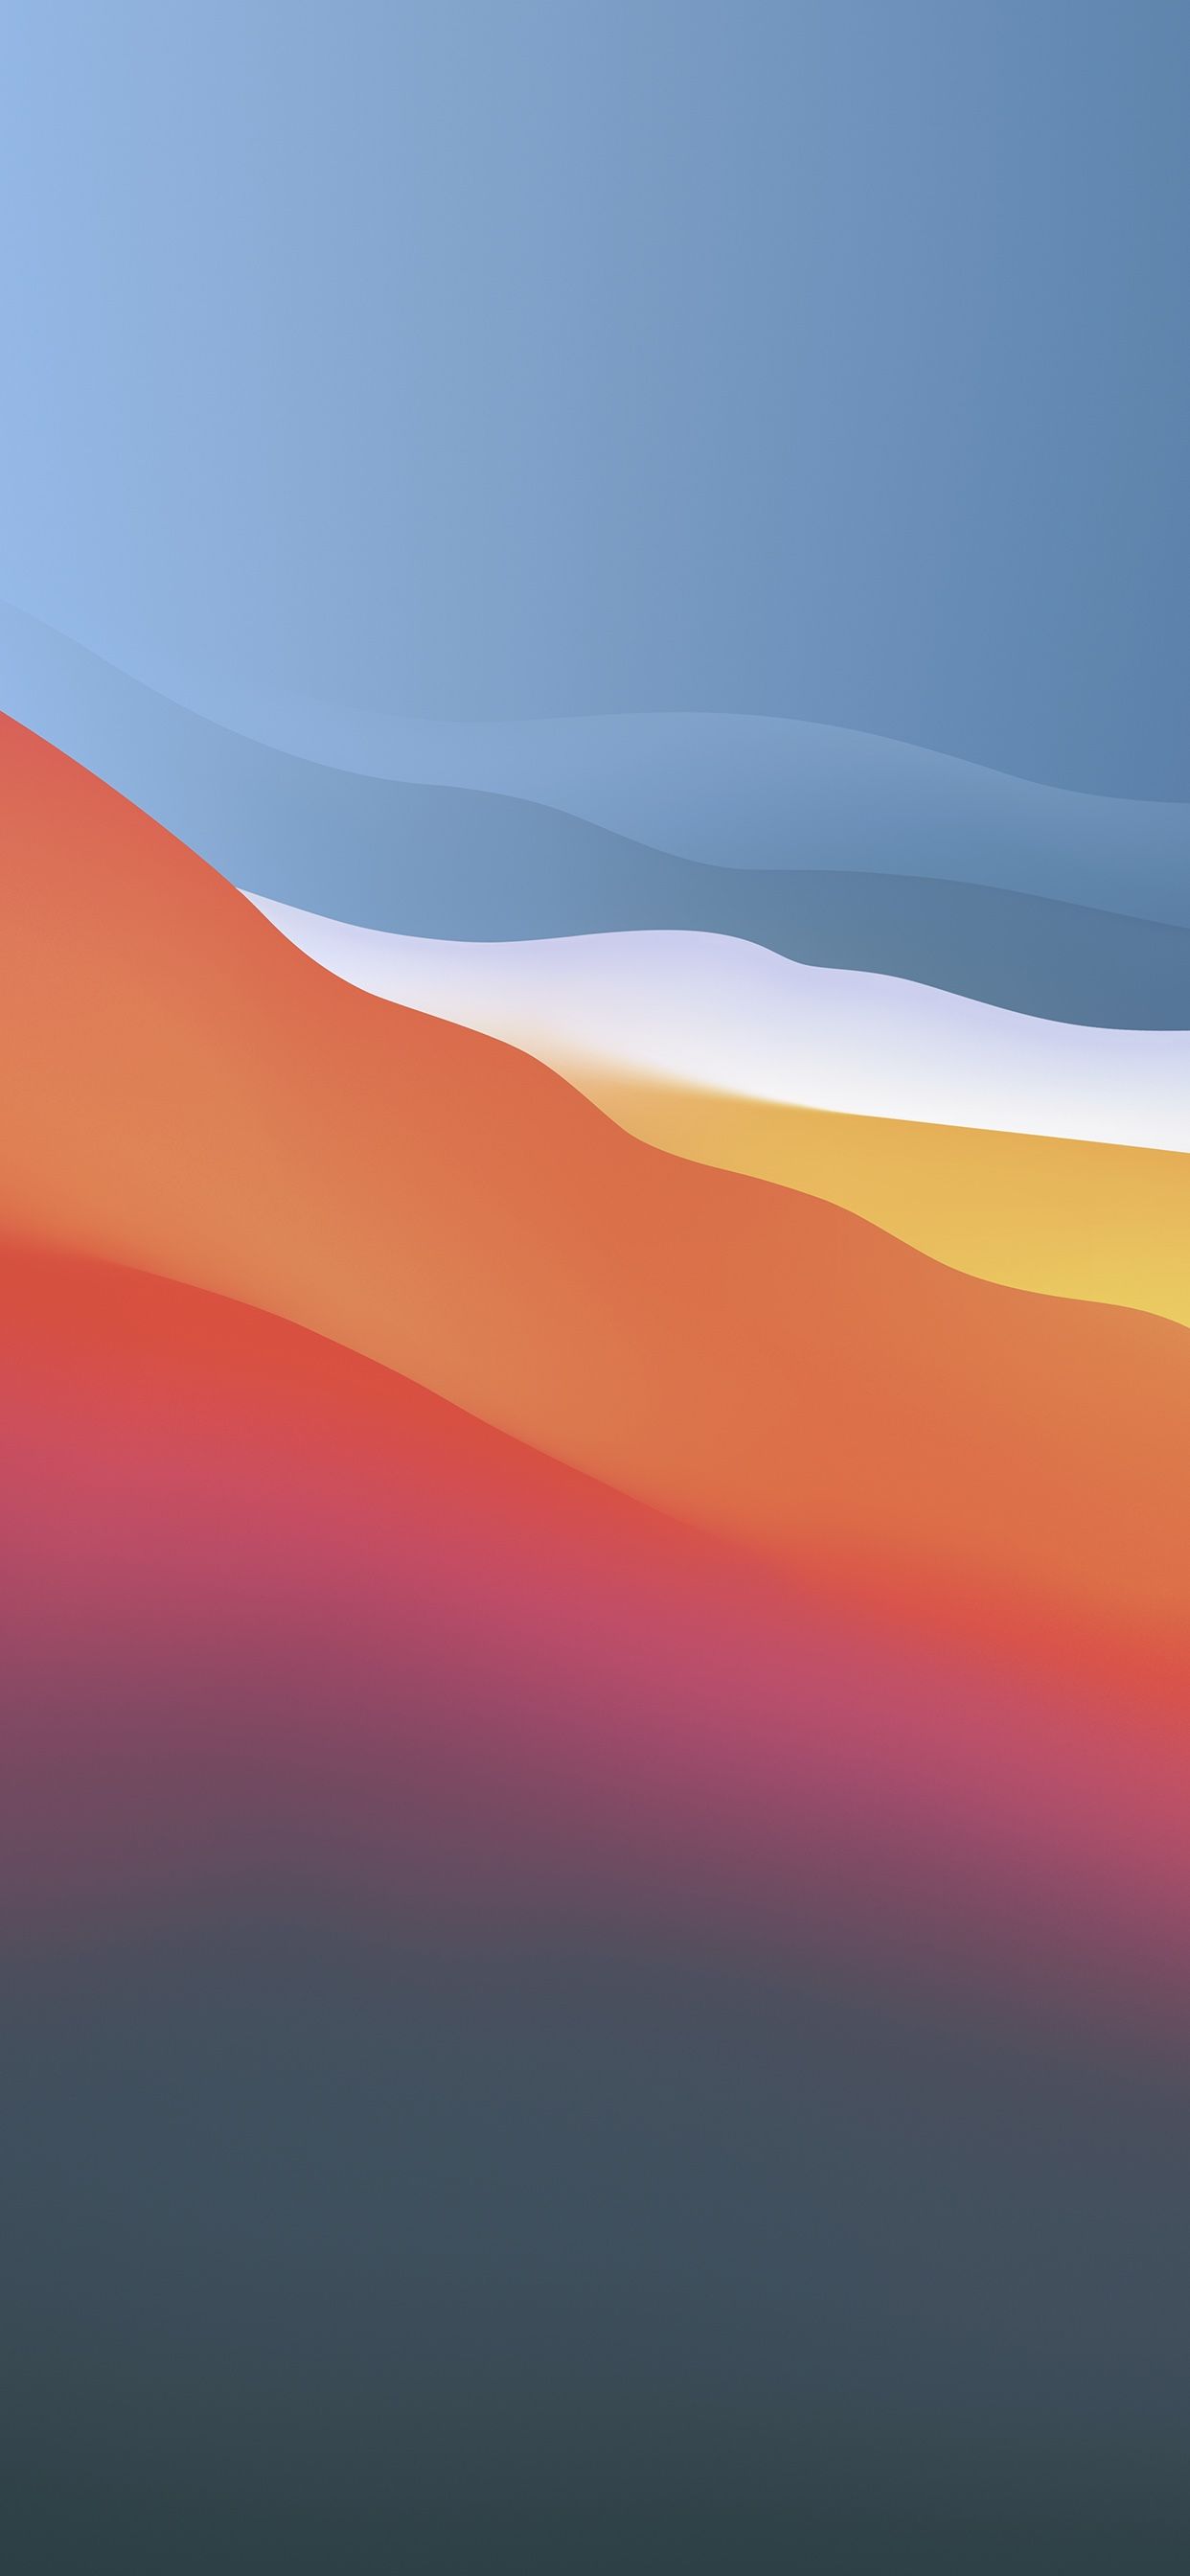 Download these modified iOS 14 and Big Sur wallpapers